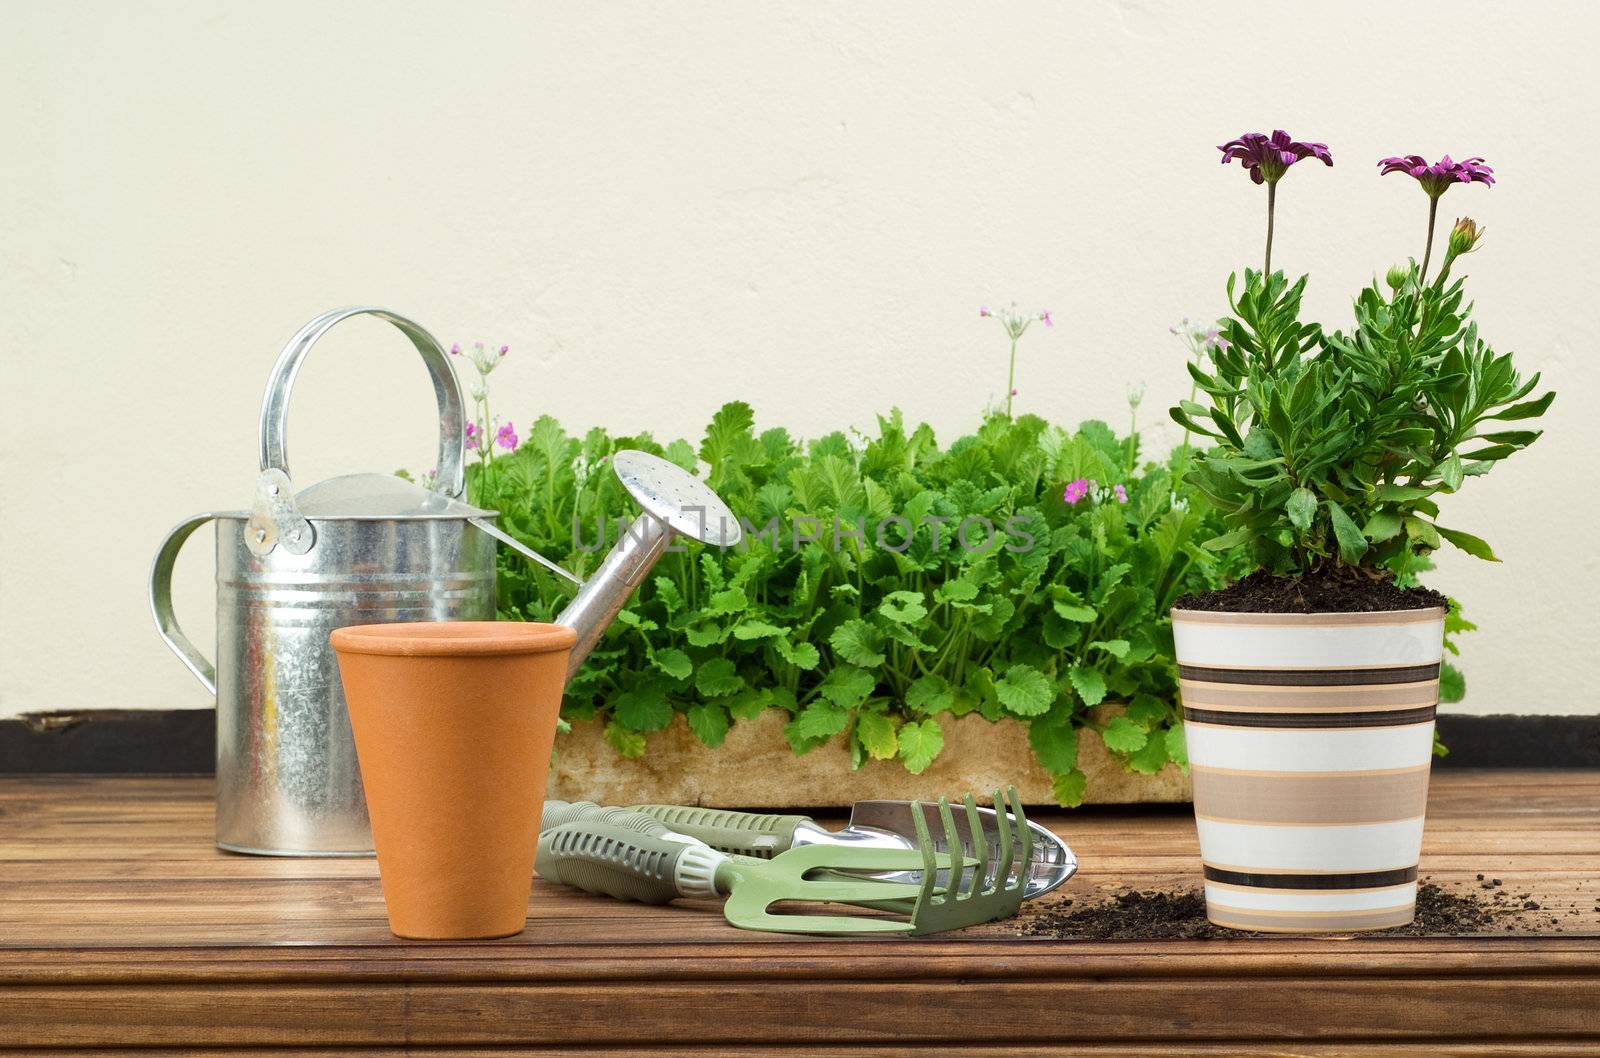 Flower Pots with Gardening Tools and Watering Can Displayed on Wooden Table